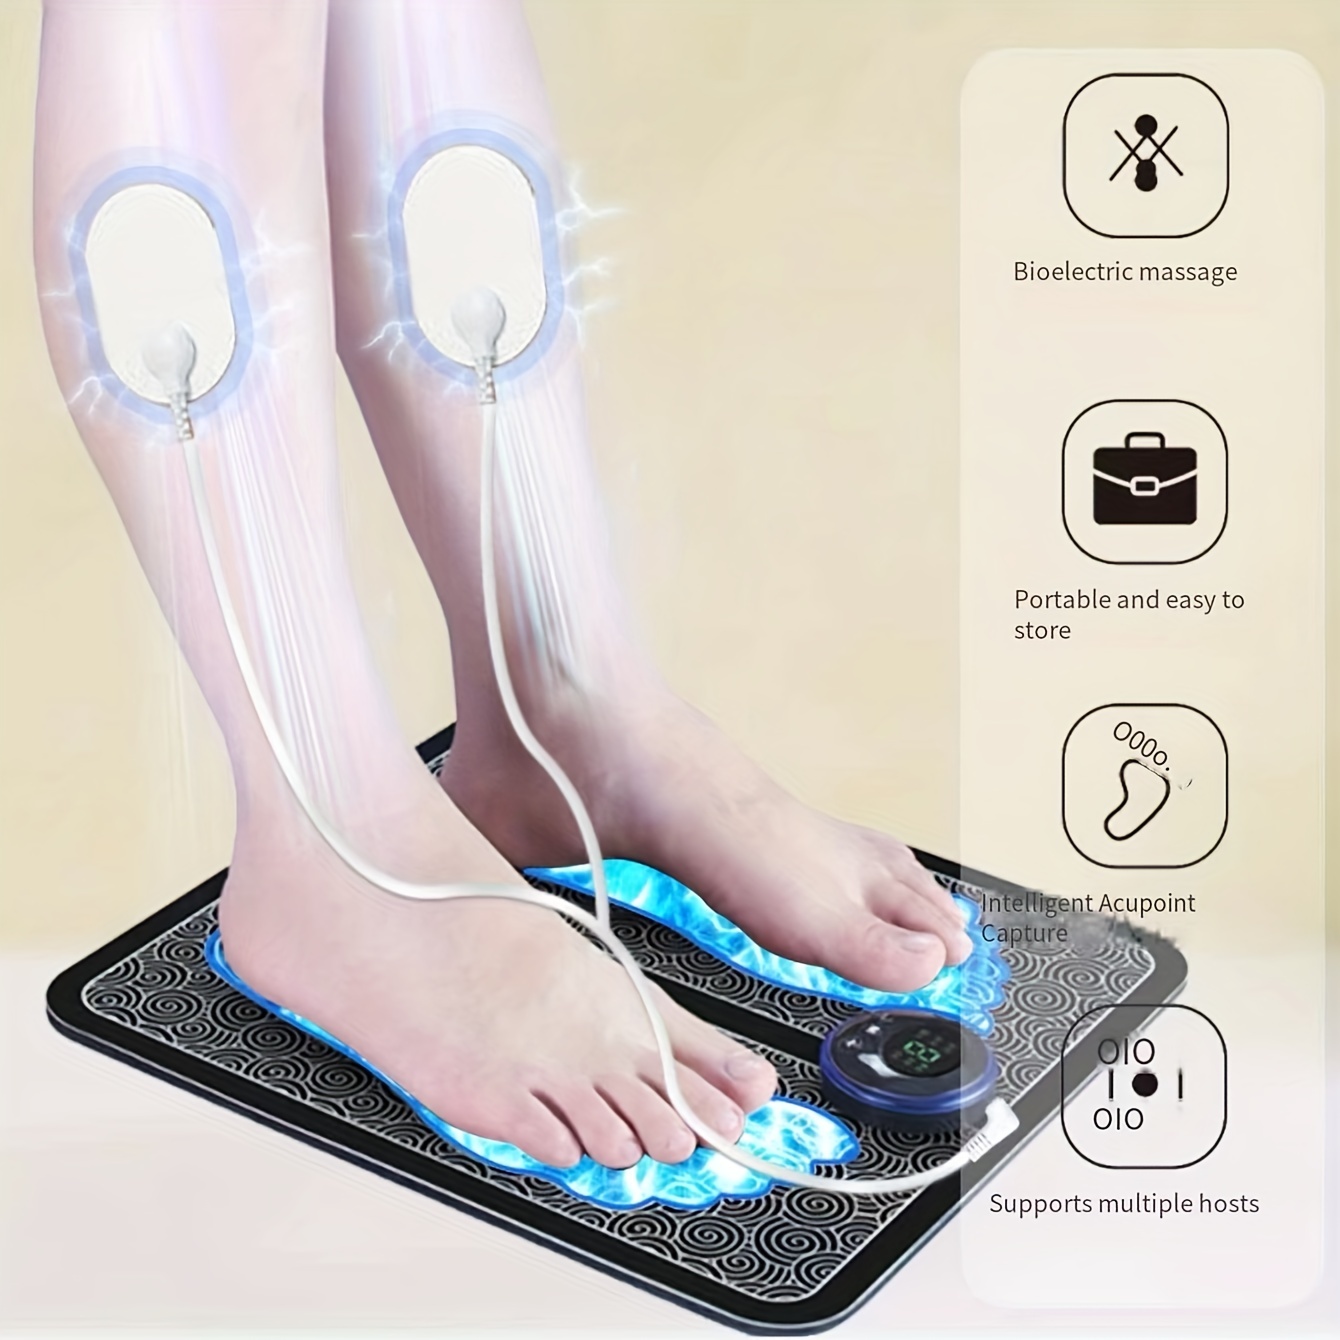 electric ems foot massager pad - Foot dead skin remover